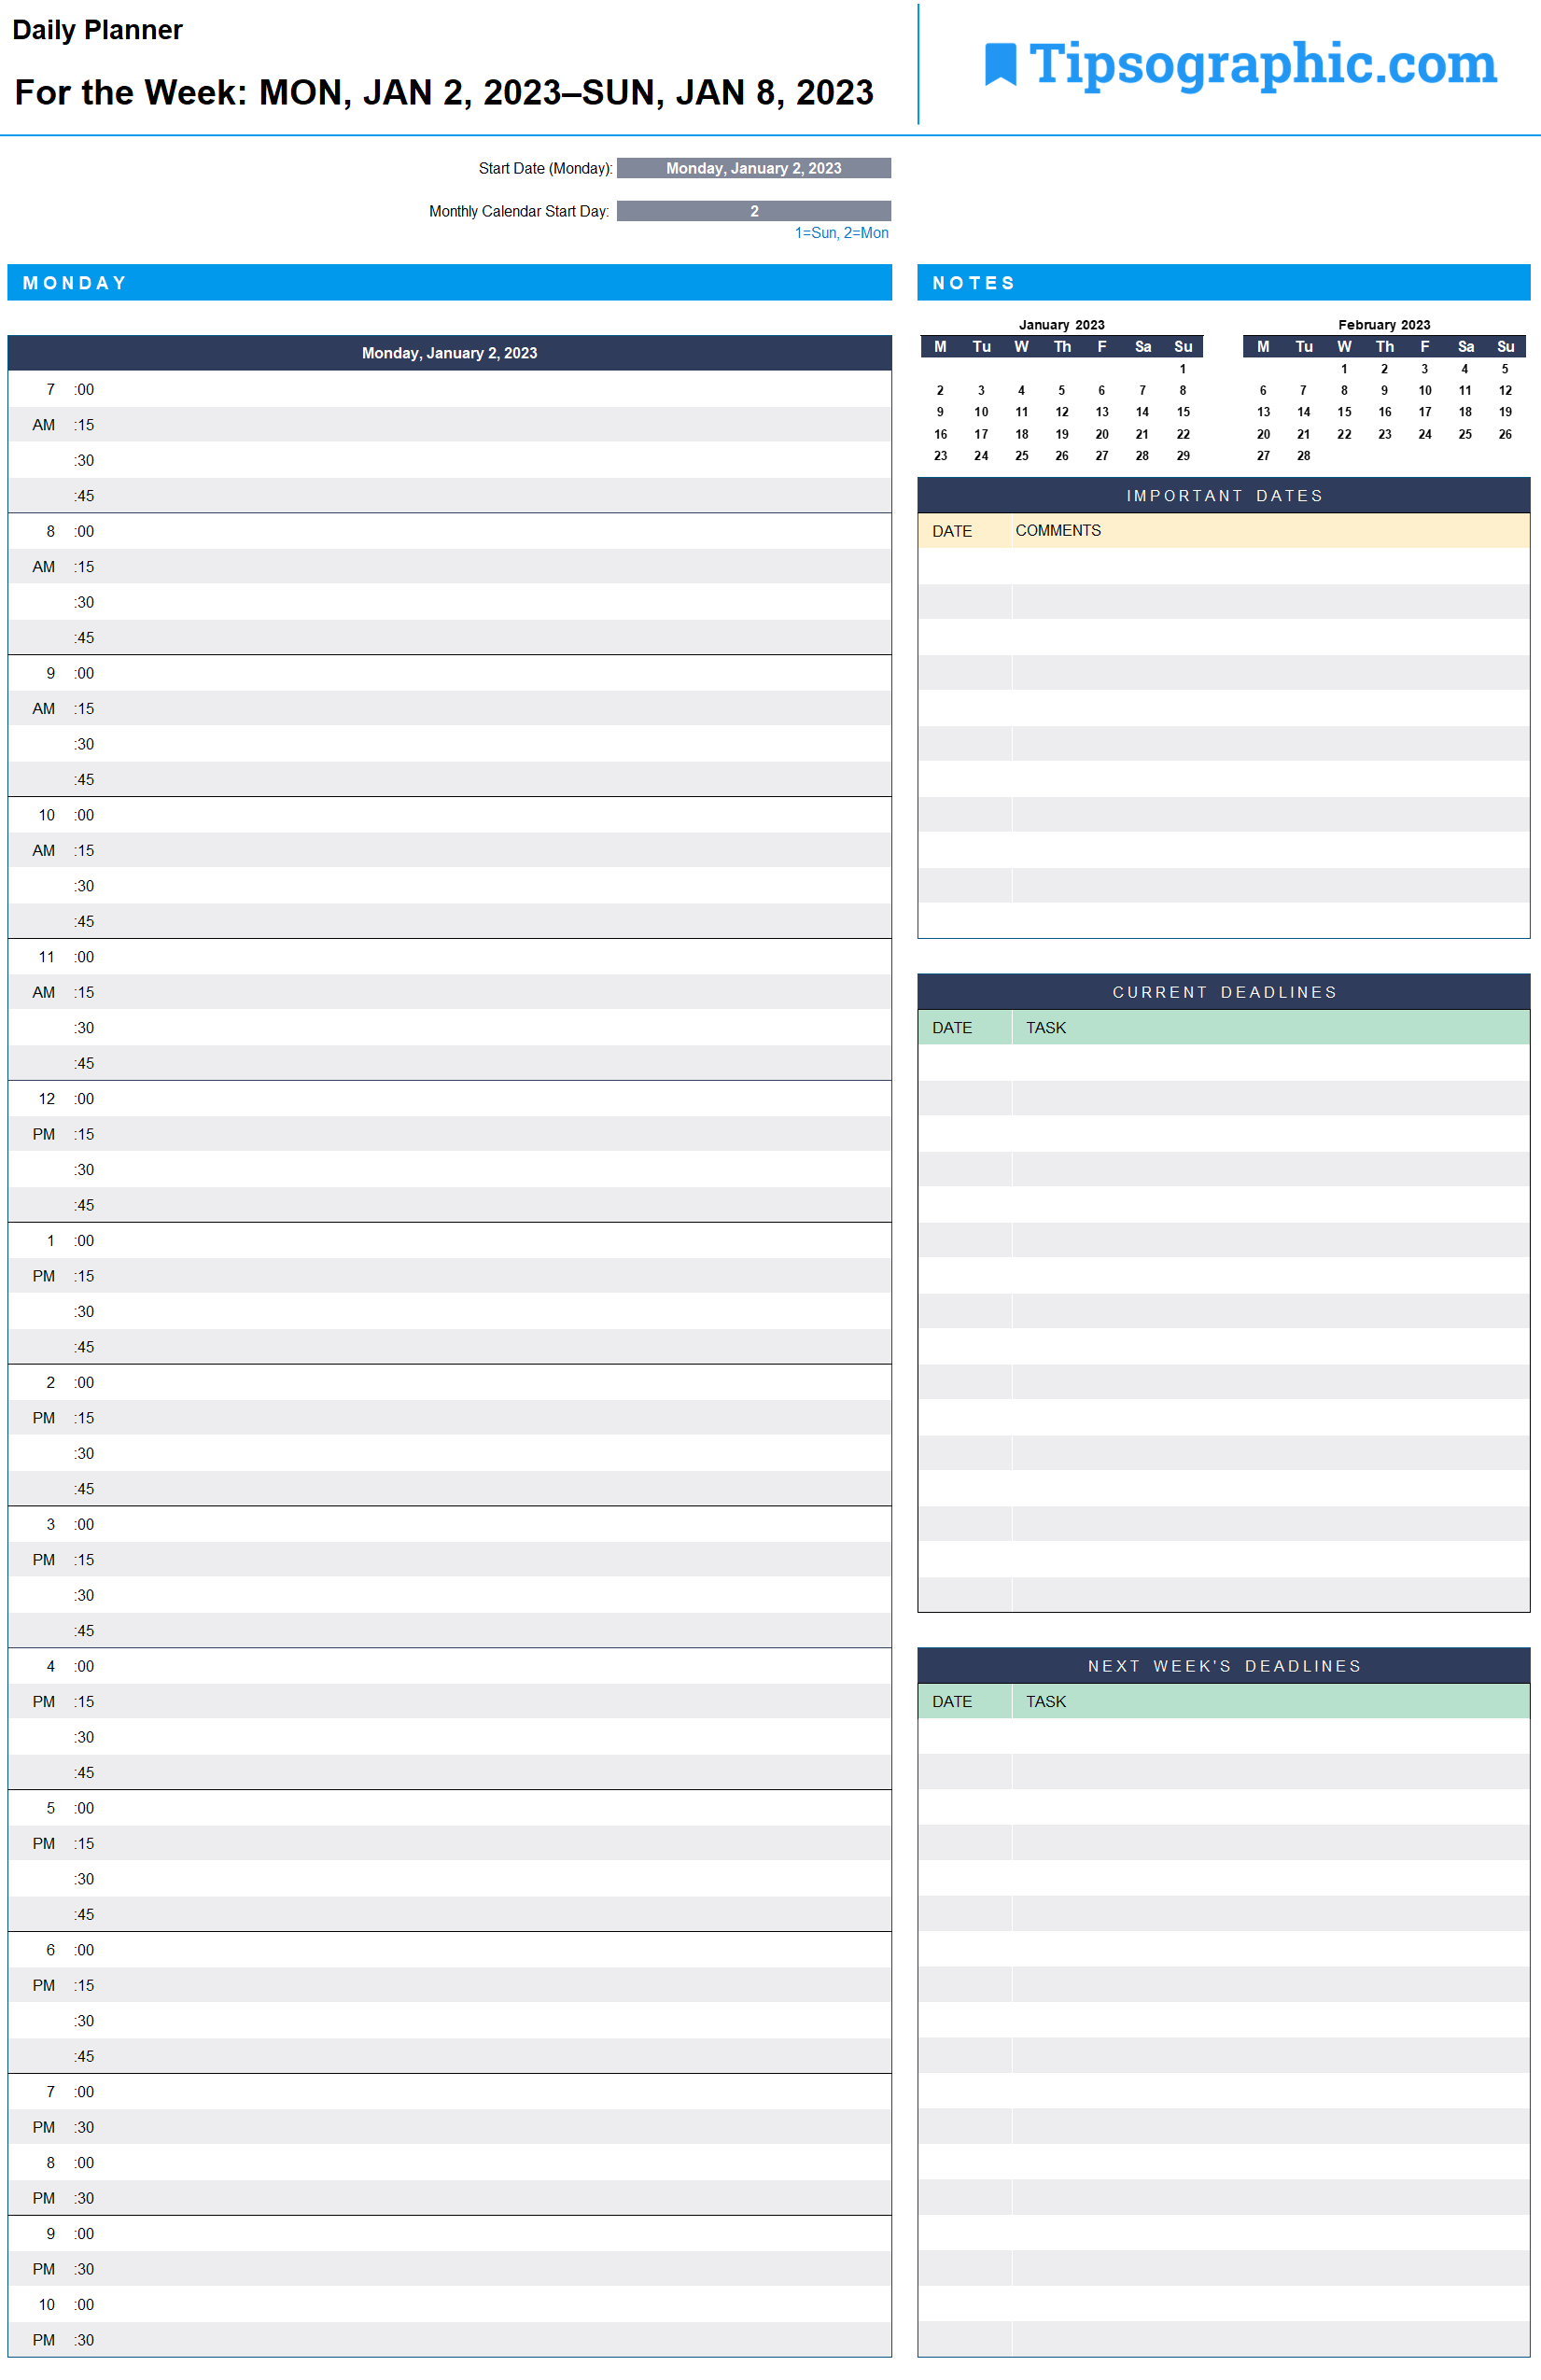 2023 printable daily planner excel tipsographic